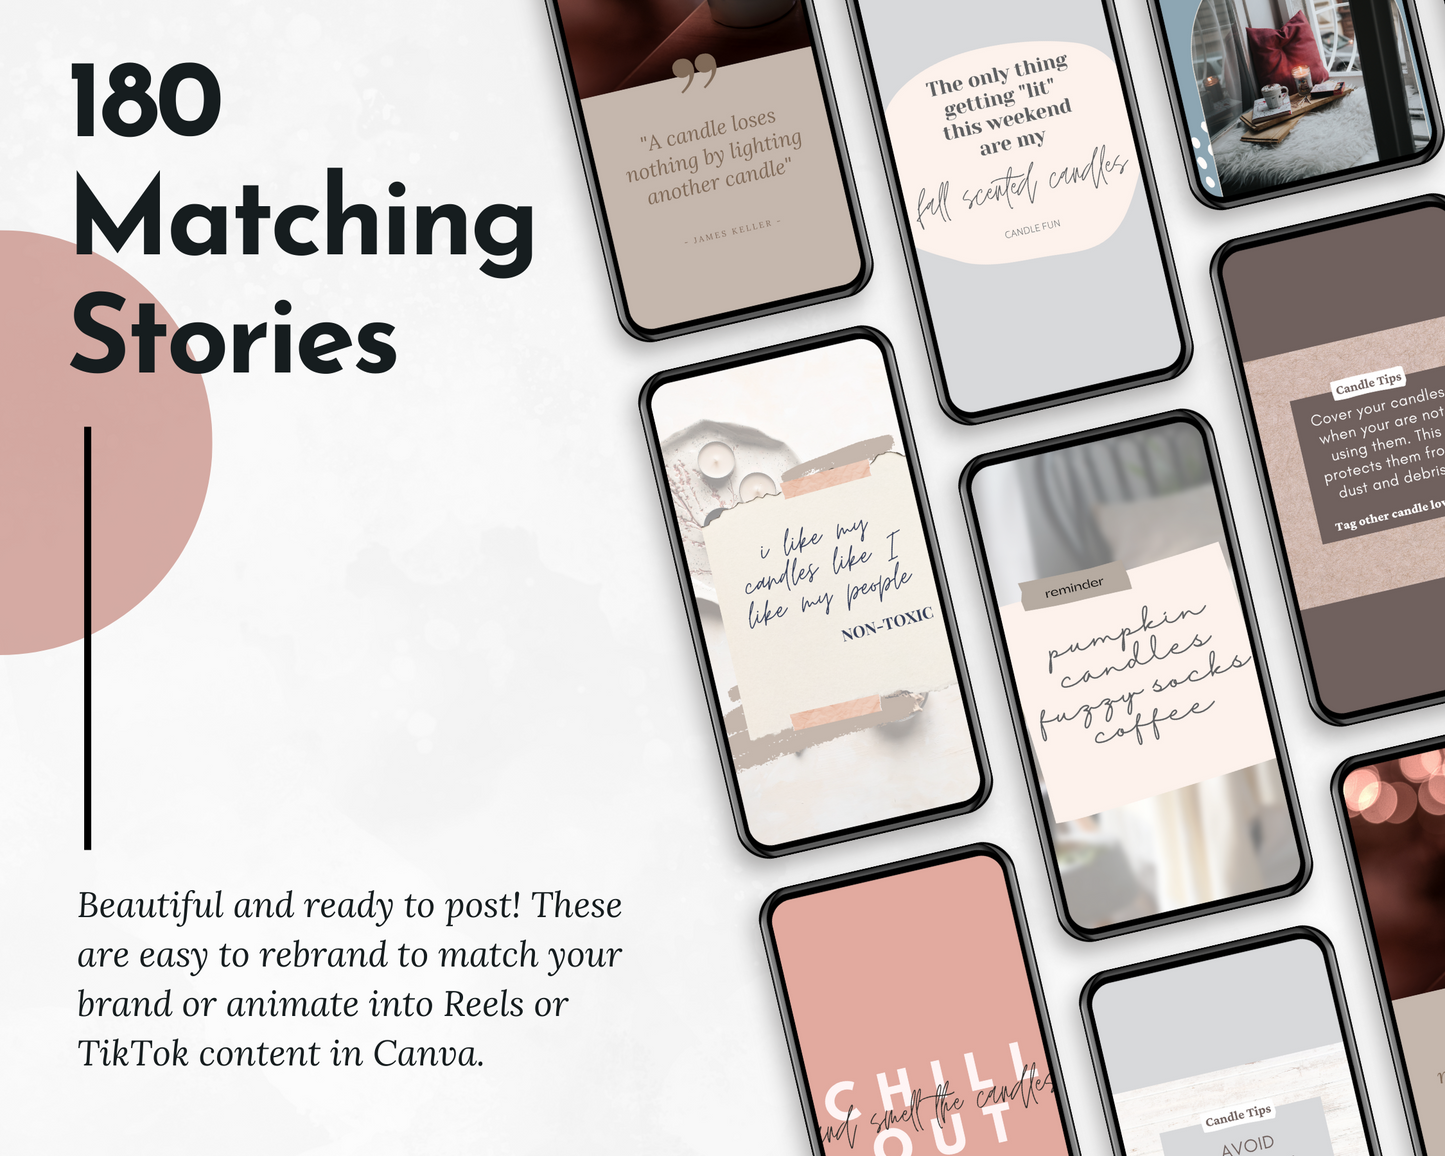 A collection of Candles & Scents Social Media Post Bundle showcasing 180 matching stories on Socially Inclined.